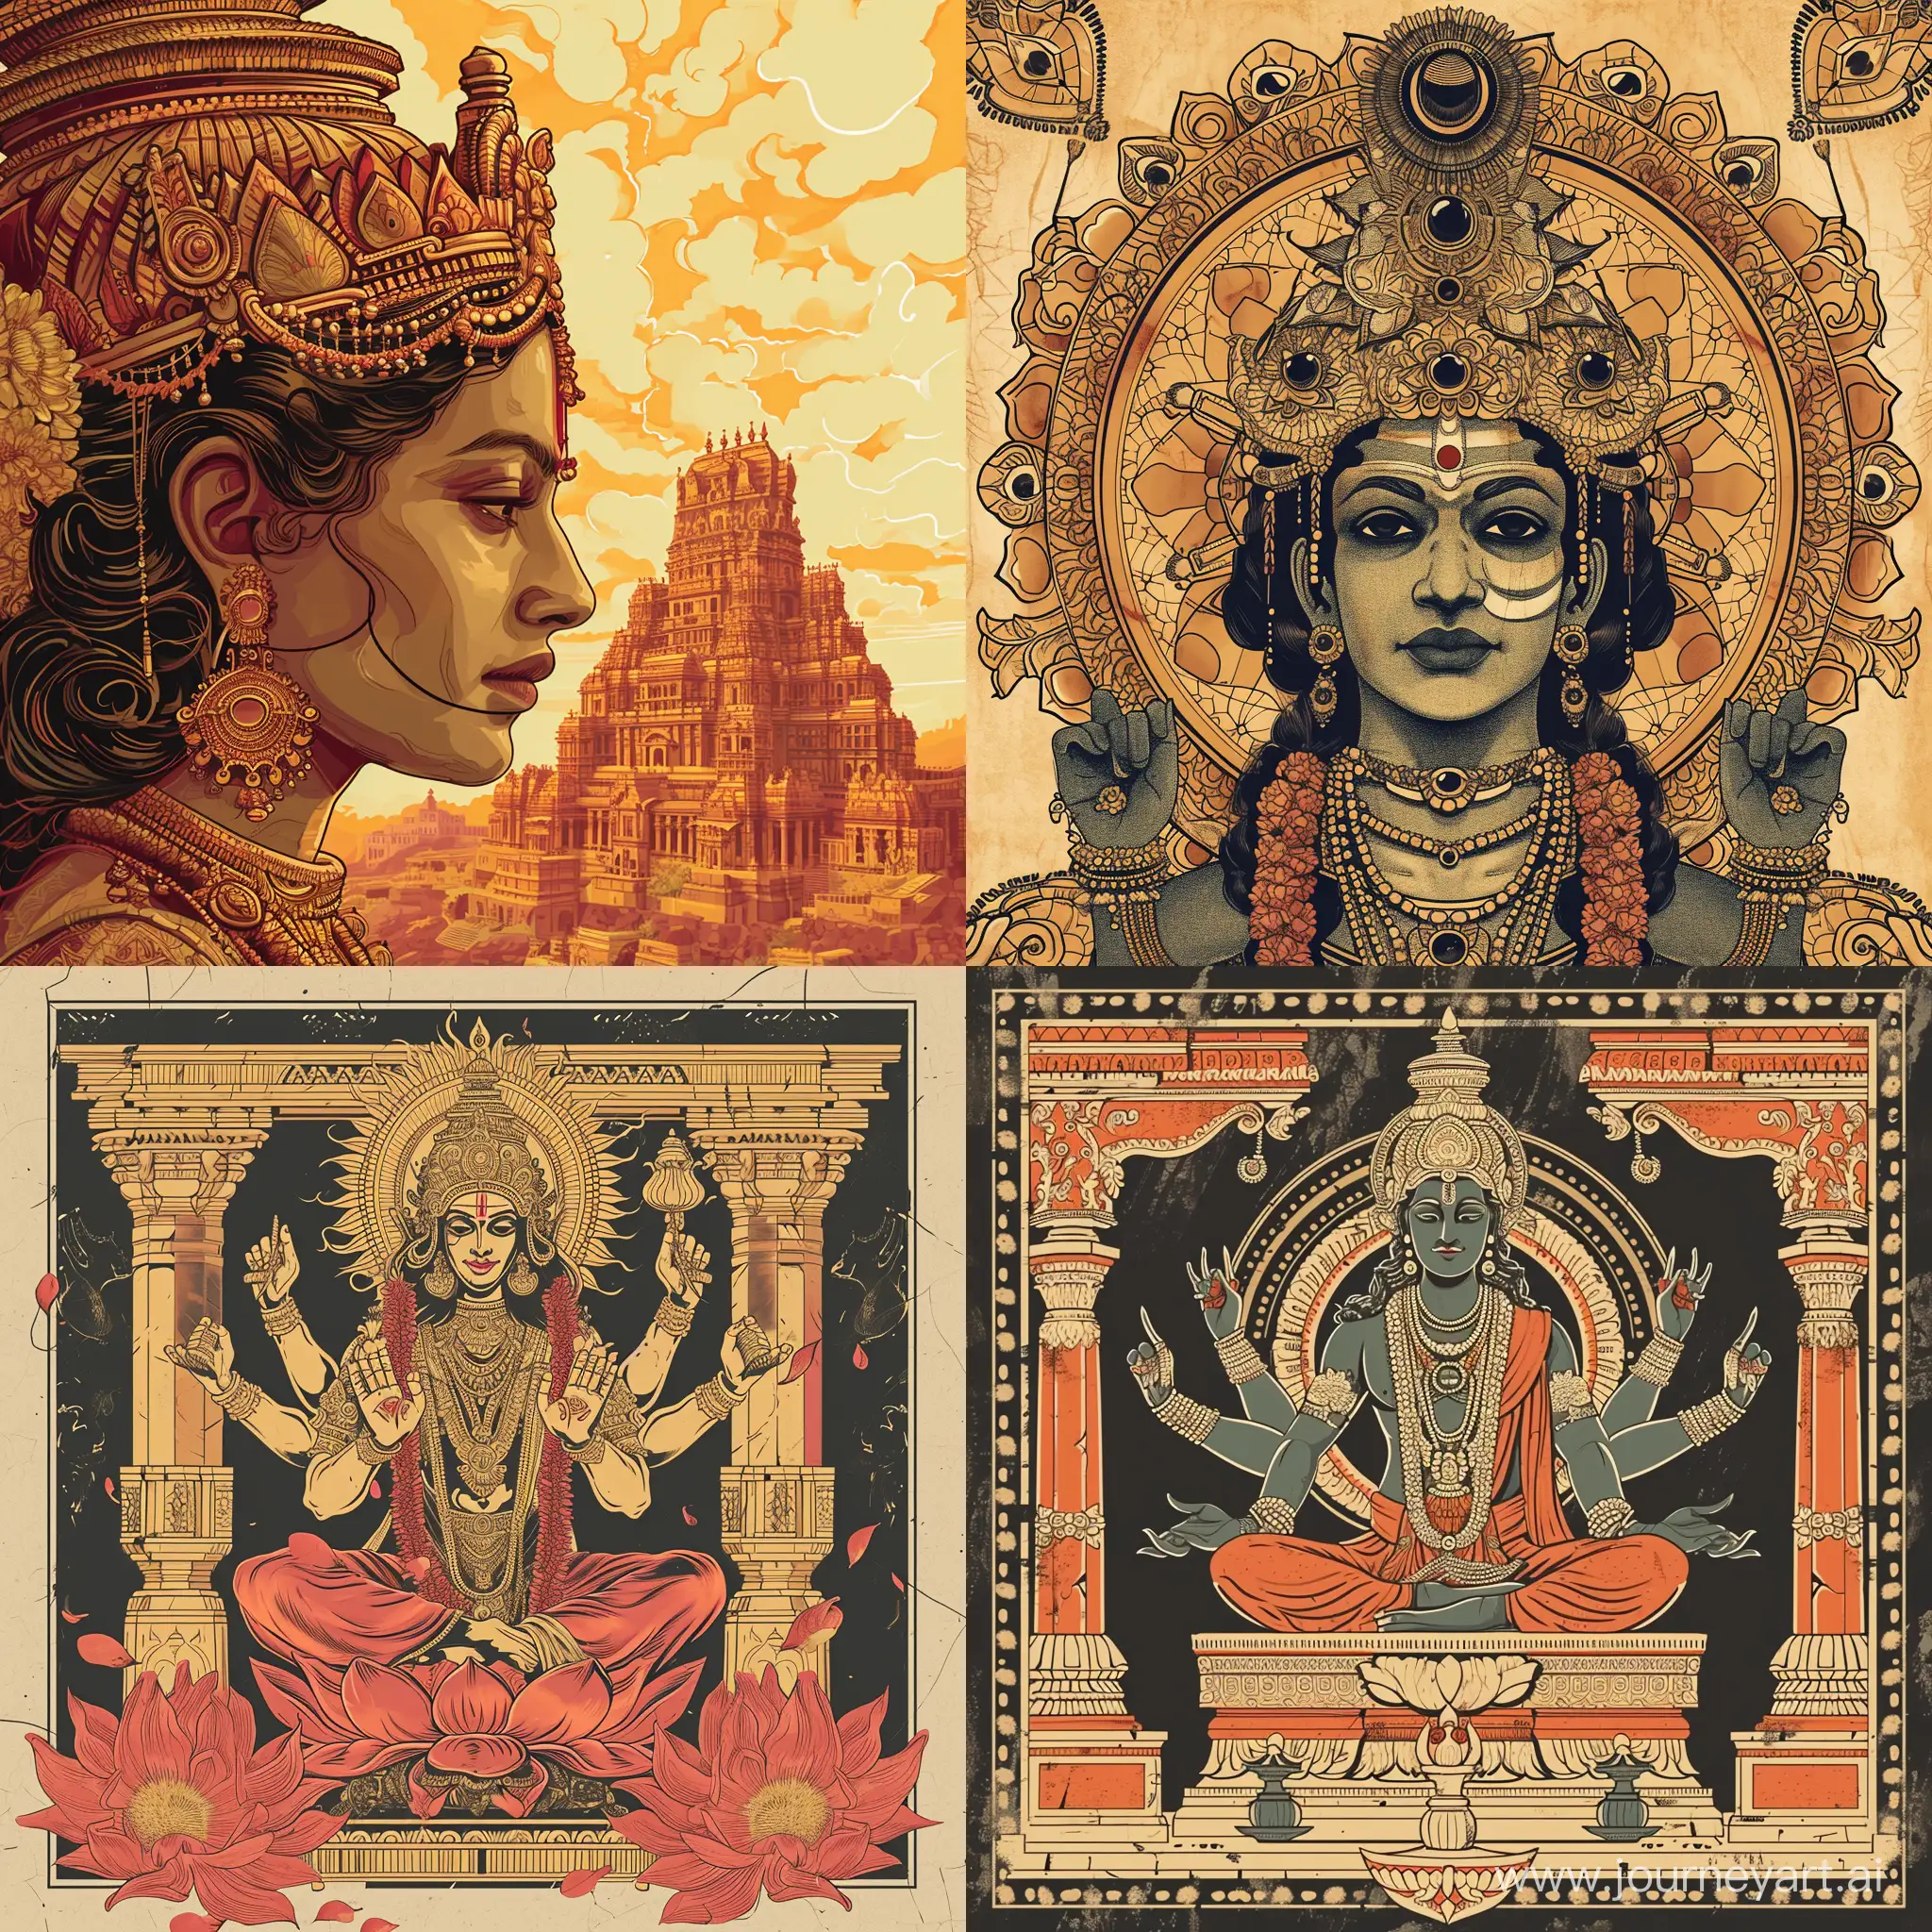 ancient Hindu glory and history, bold and creative intricate illustration